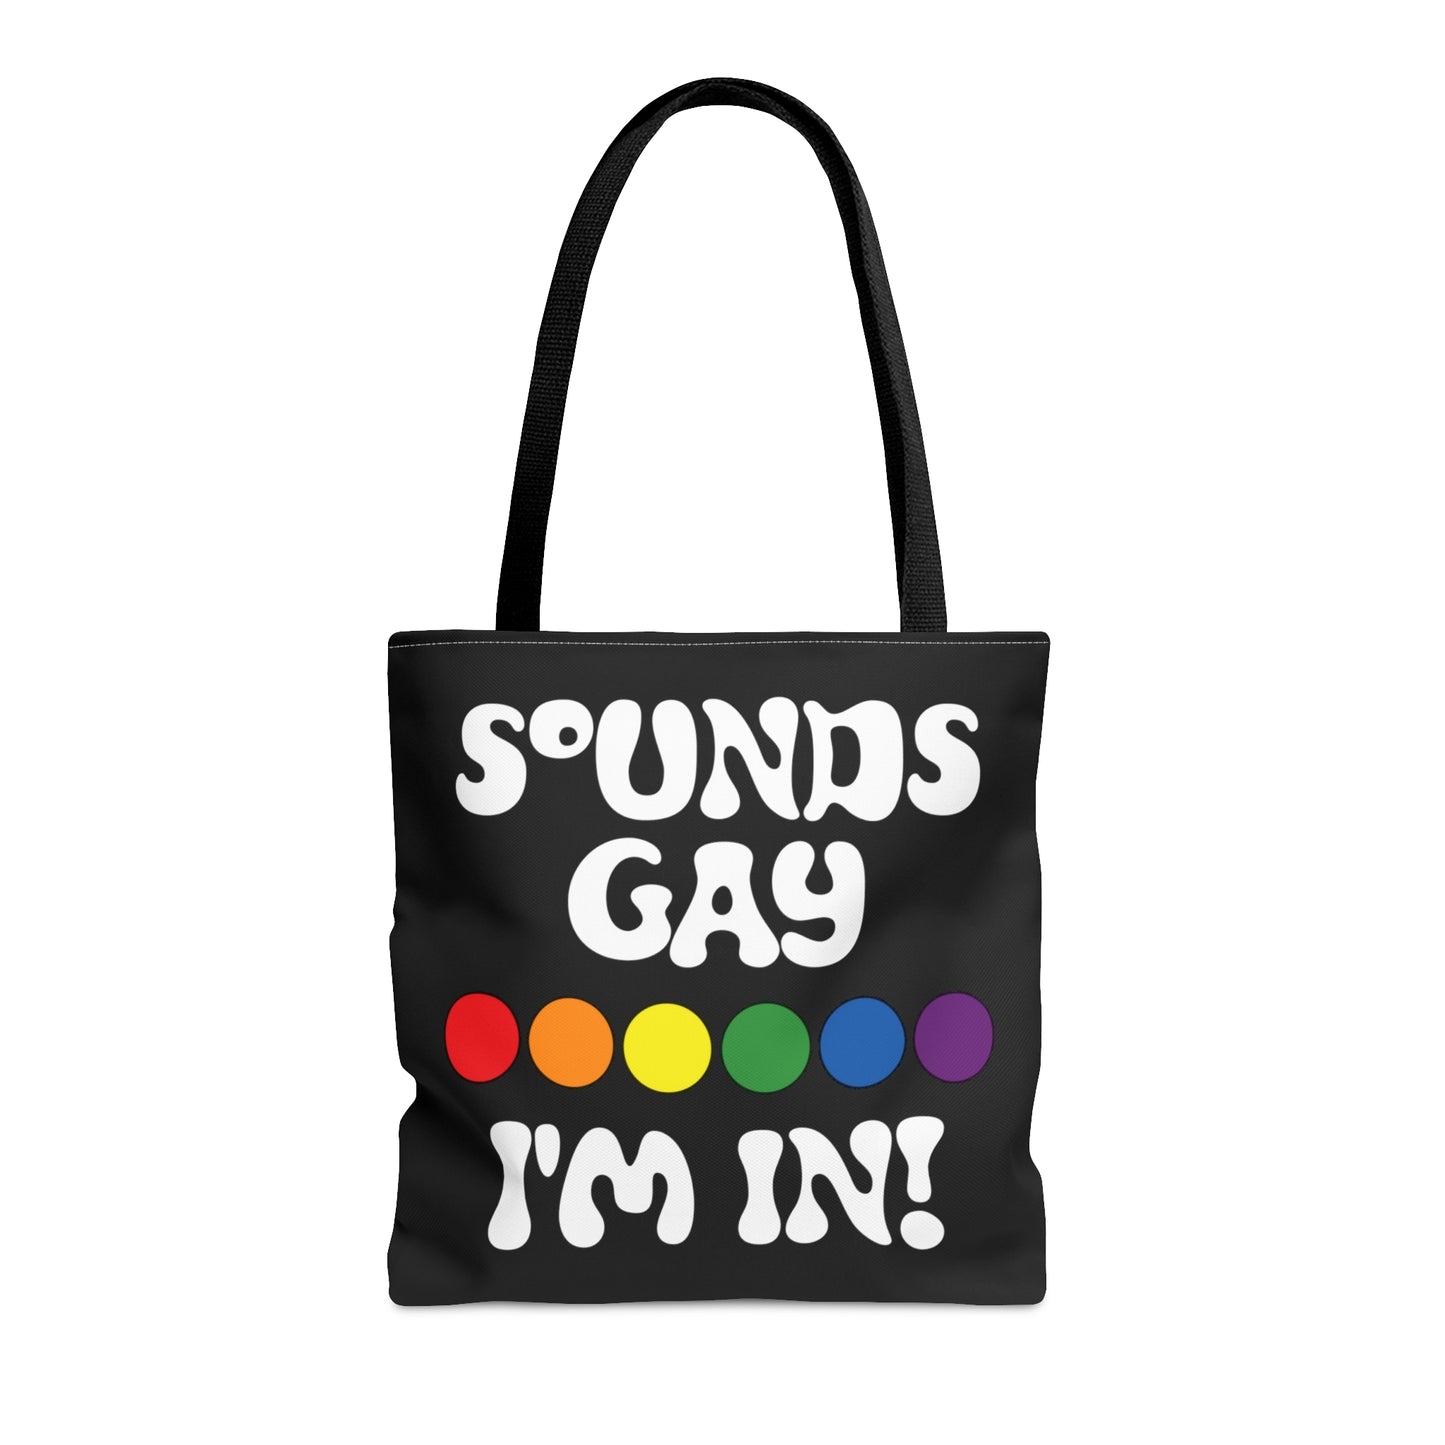 Sounds Gay I'm In Tote Bag